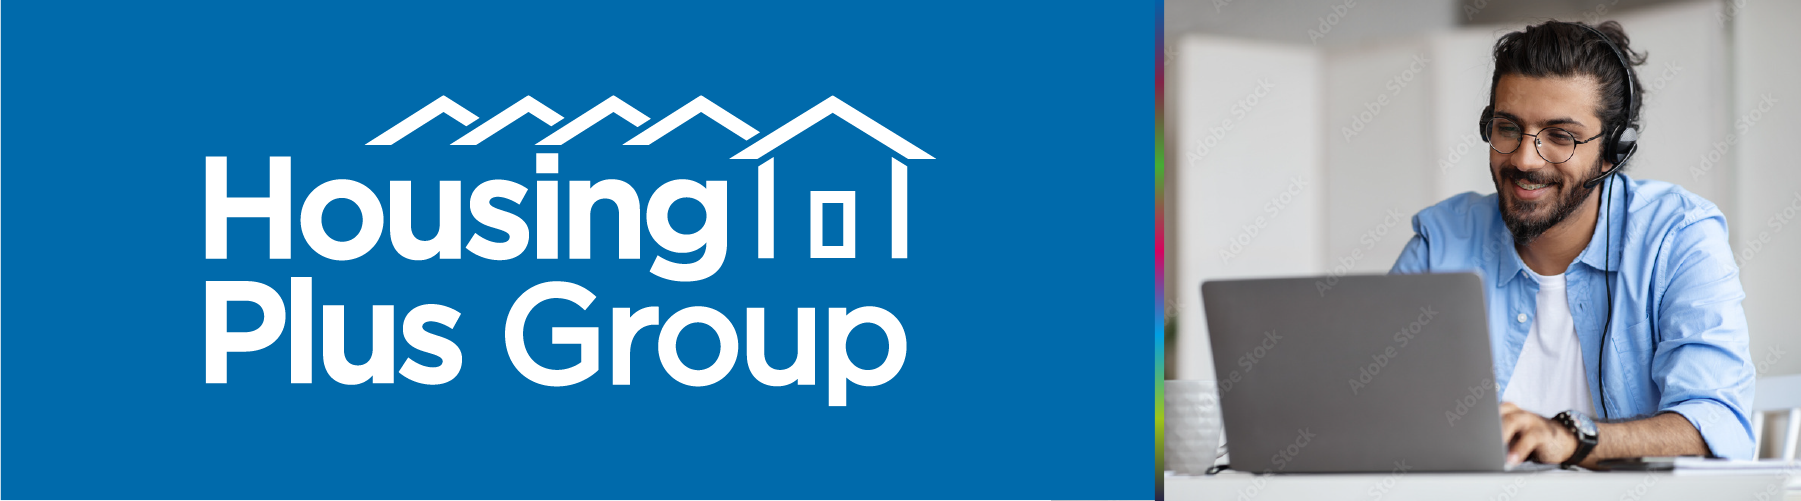 Housing Plus Group logo in white on a blue background with a photo of a dark haired man at a laptop computer in a telephone headset